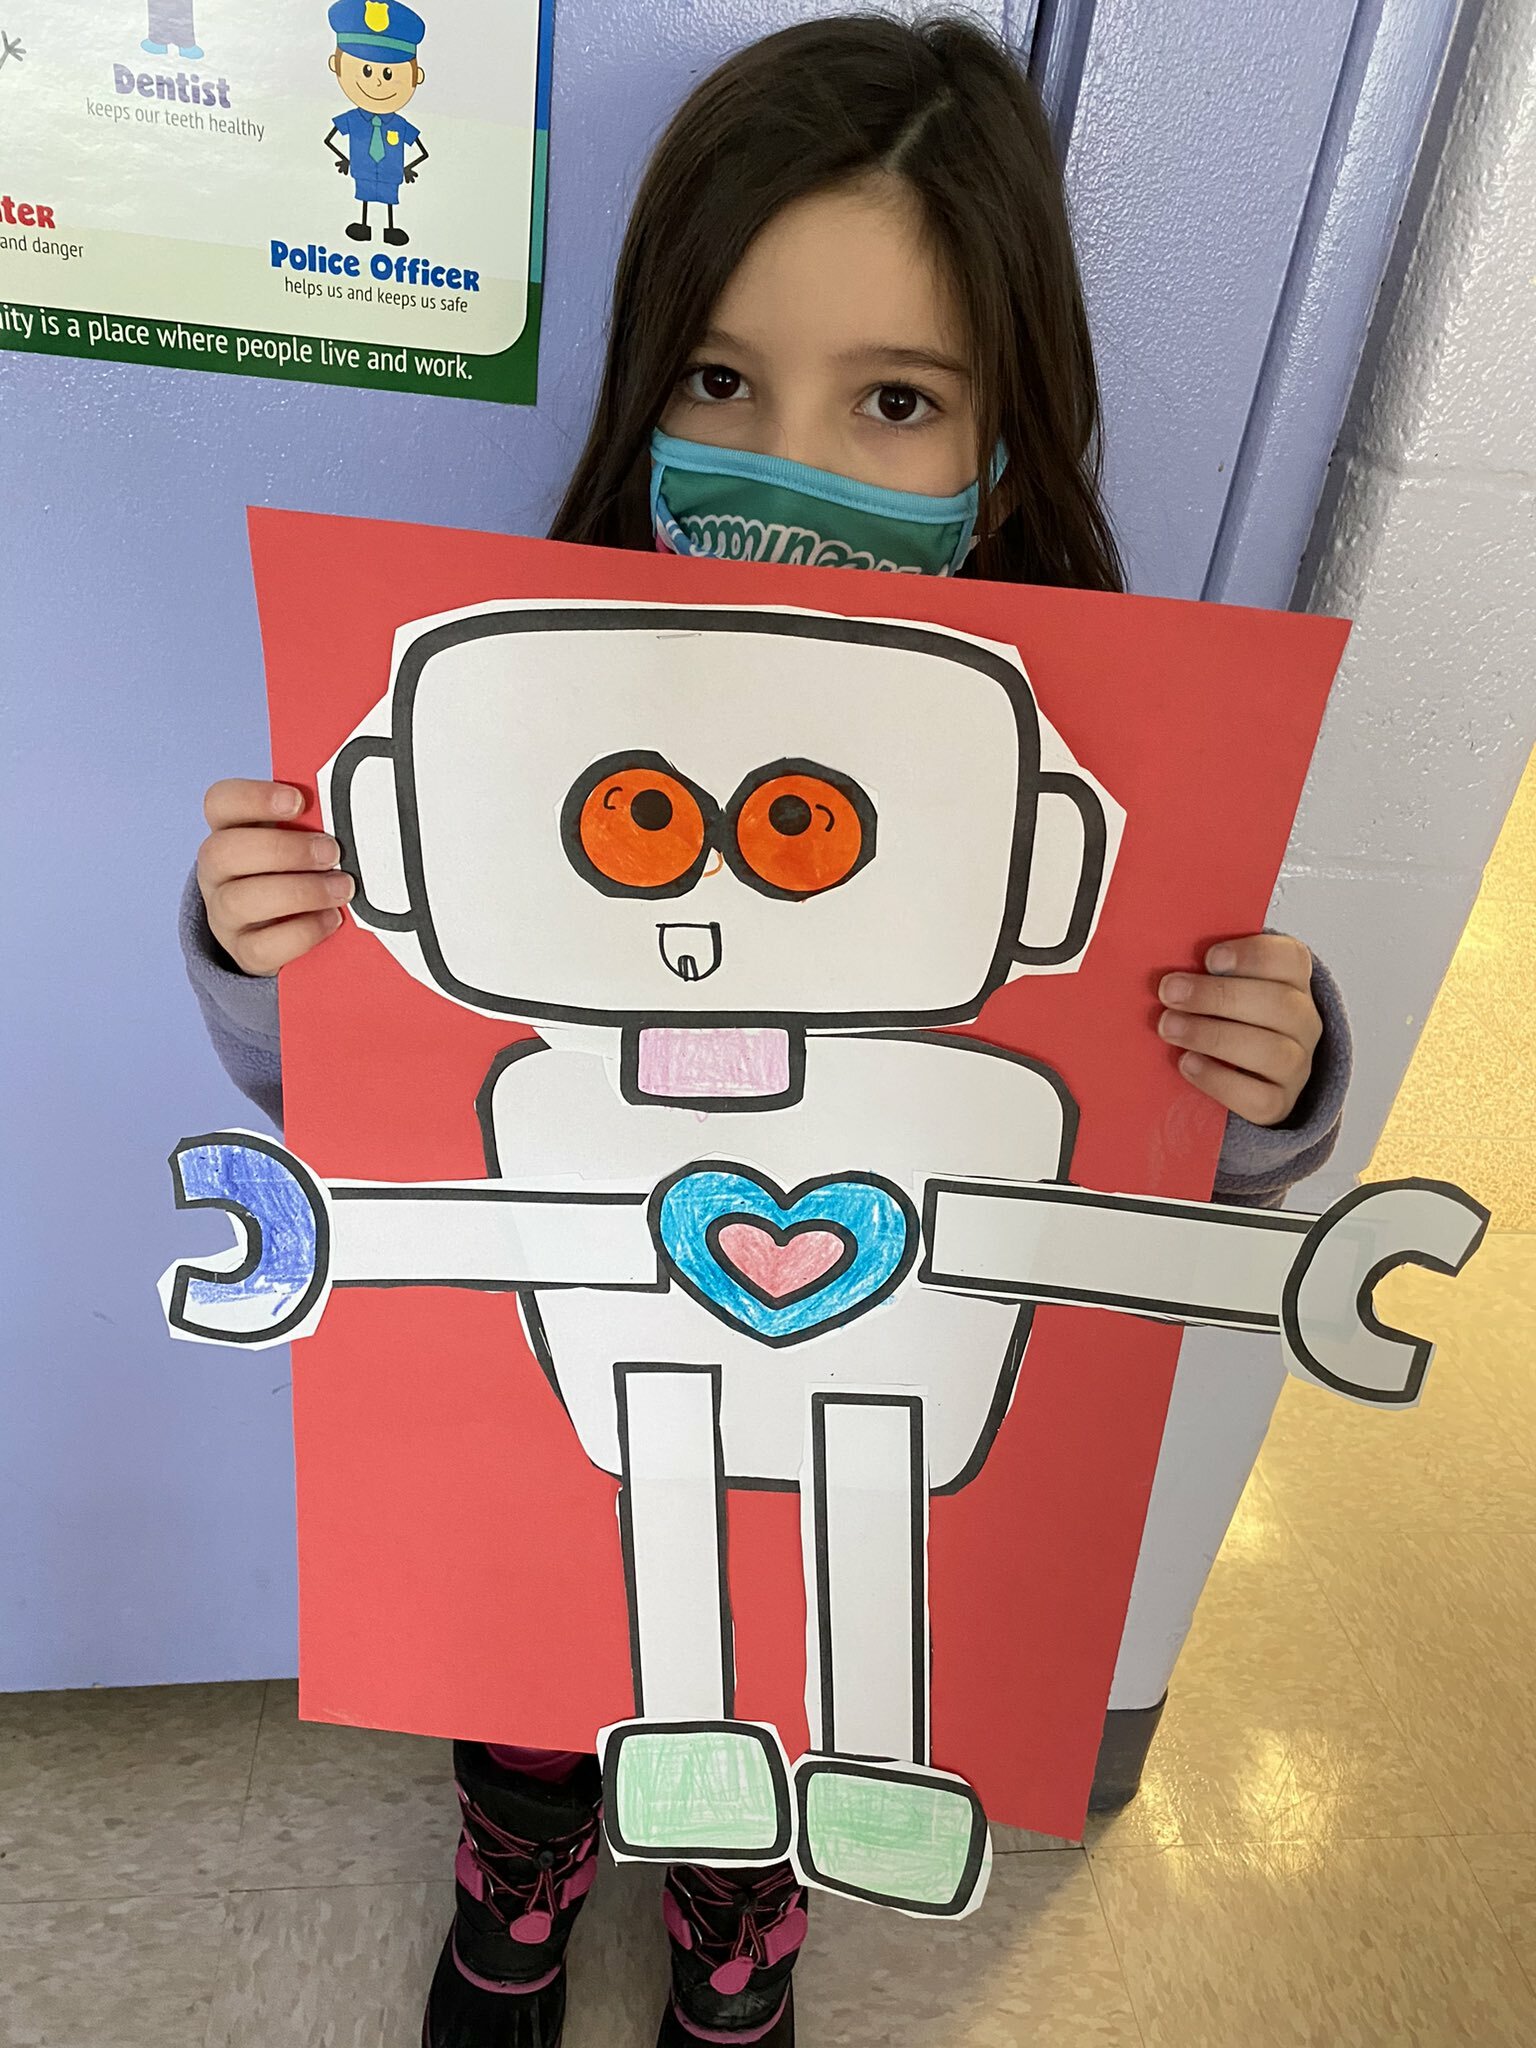 Morgan Tiska’s kindergarten class at Hampton Bays Elementary School designed “love bots” as part of a Valentine’s Day activity. Each student received a variety of paper cutouts that they colored and assembled together to make a unique and creative robot.